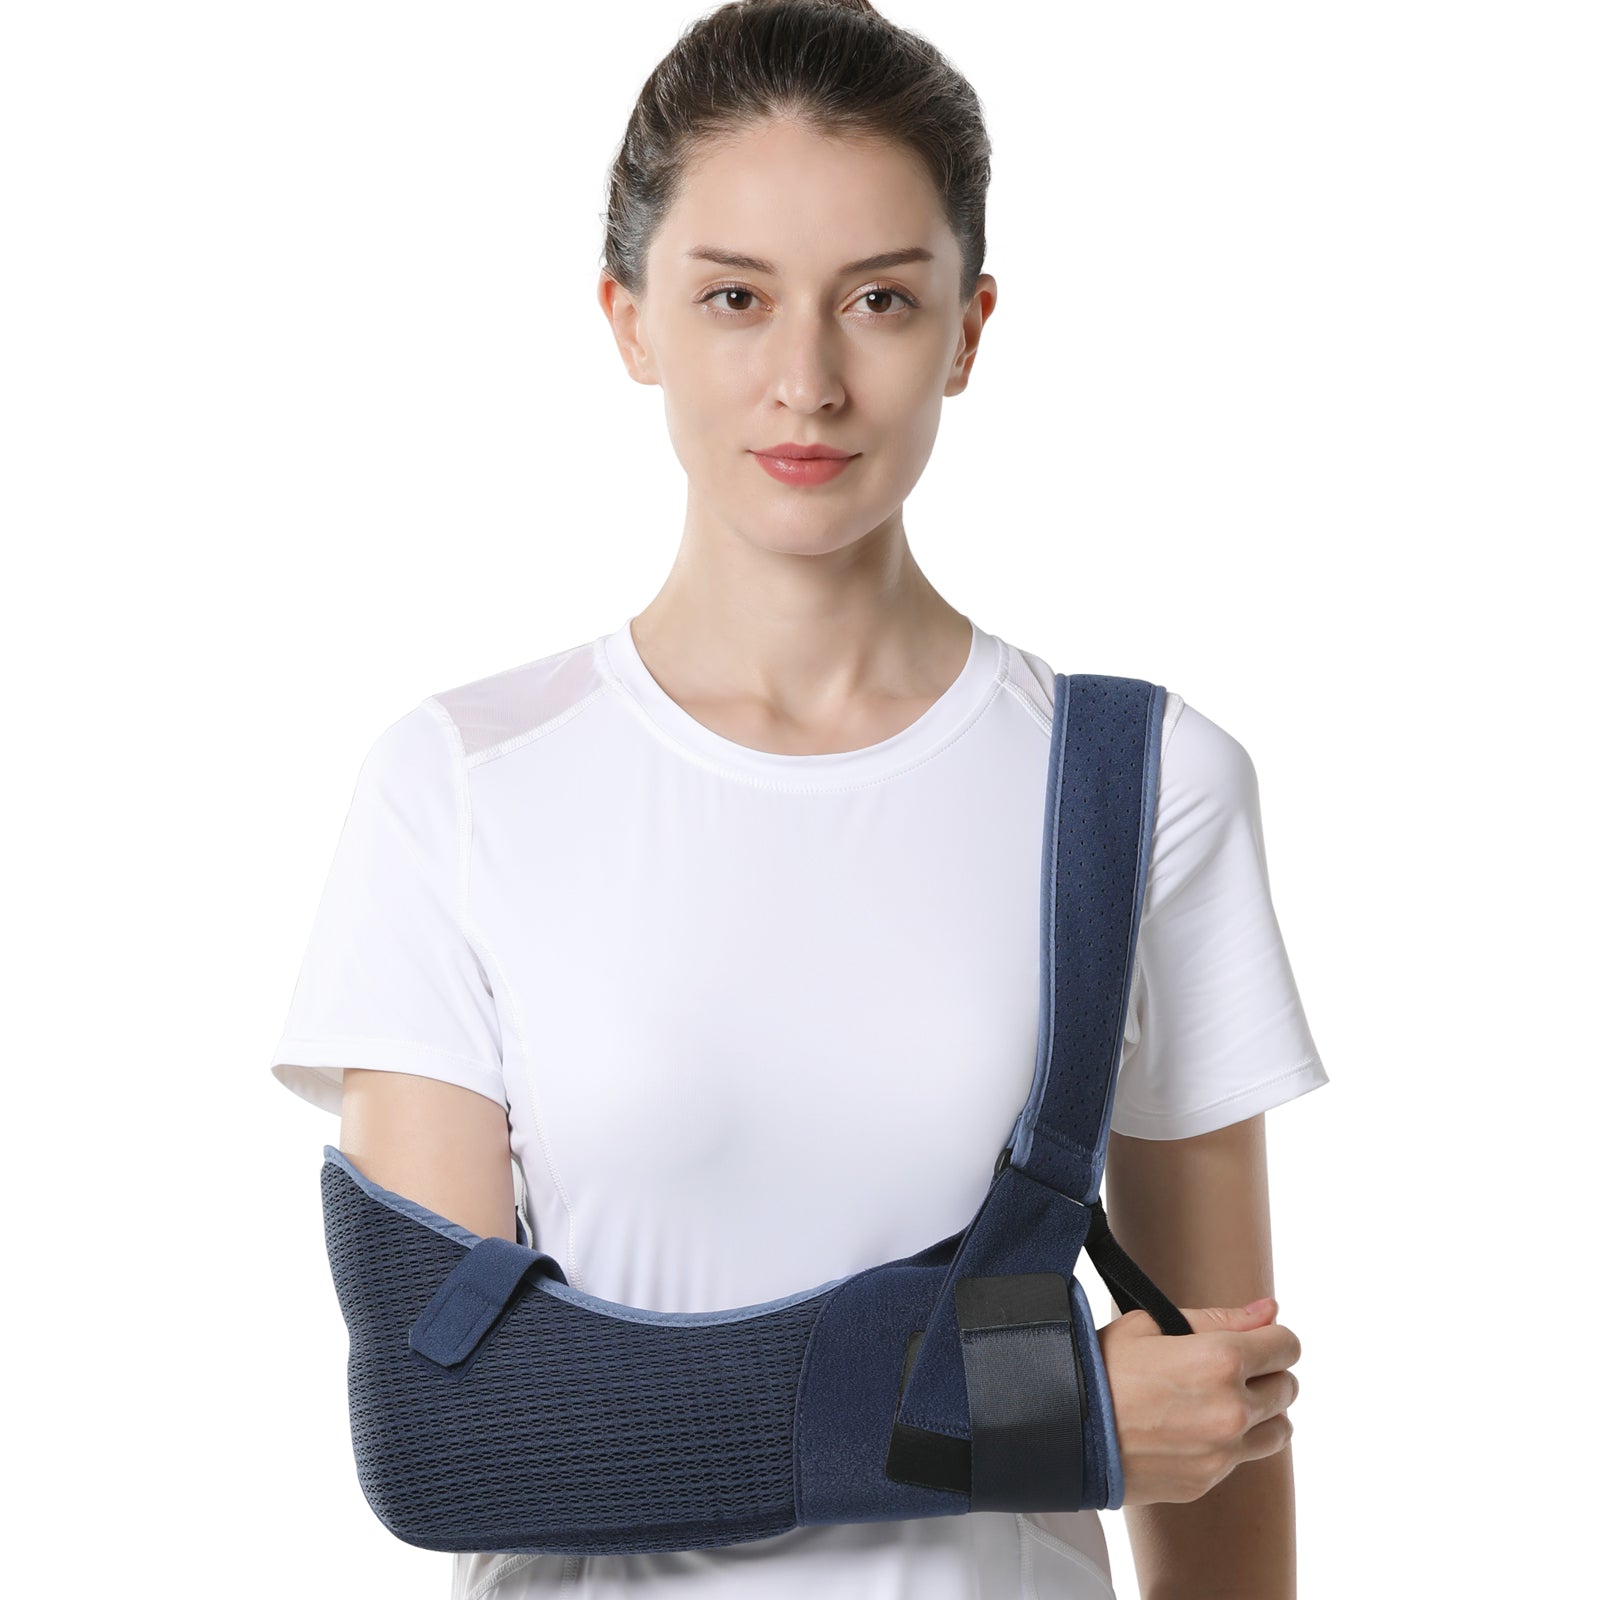 The Shoulder Sling Patented Arm Support Strap